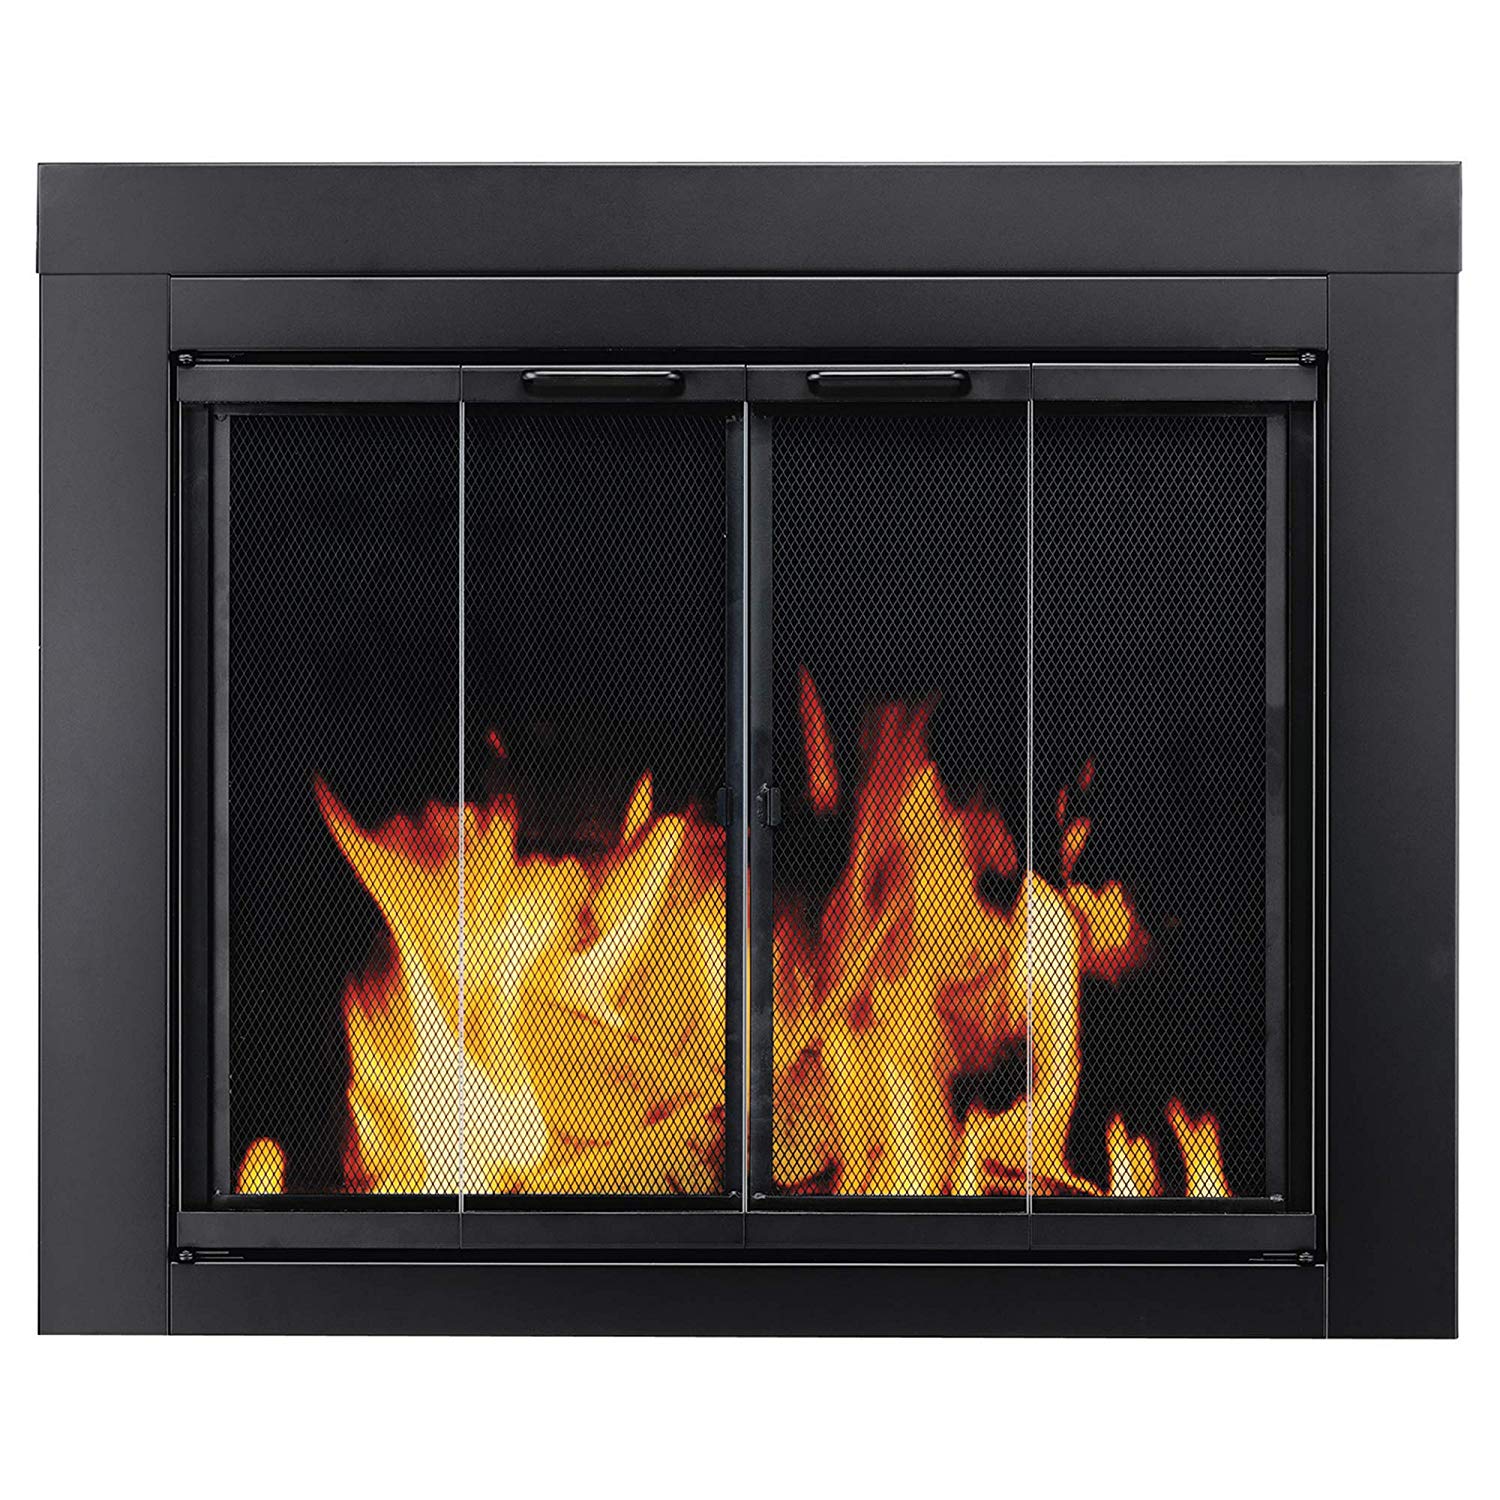 Vintage Fireplace Screen Fresh Pleasant Hearth at 1000 ascot Fireplace Glass Door Black Small